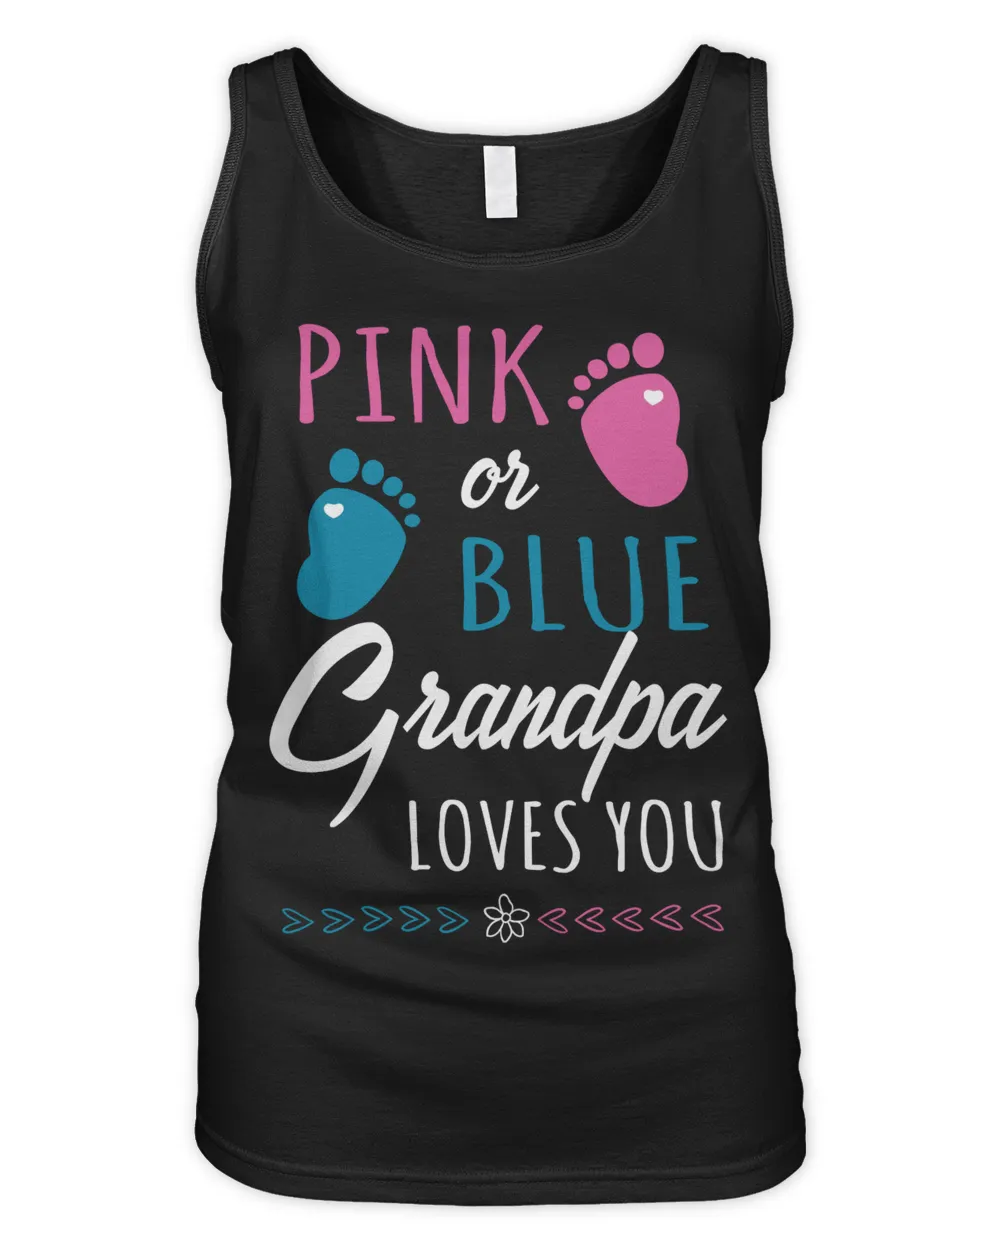 Pink or blue grandpa loves you